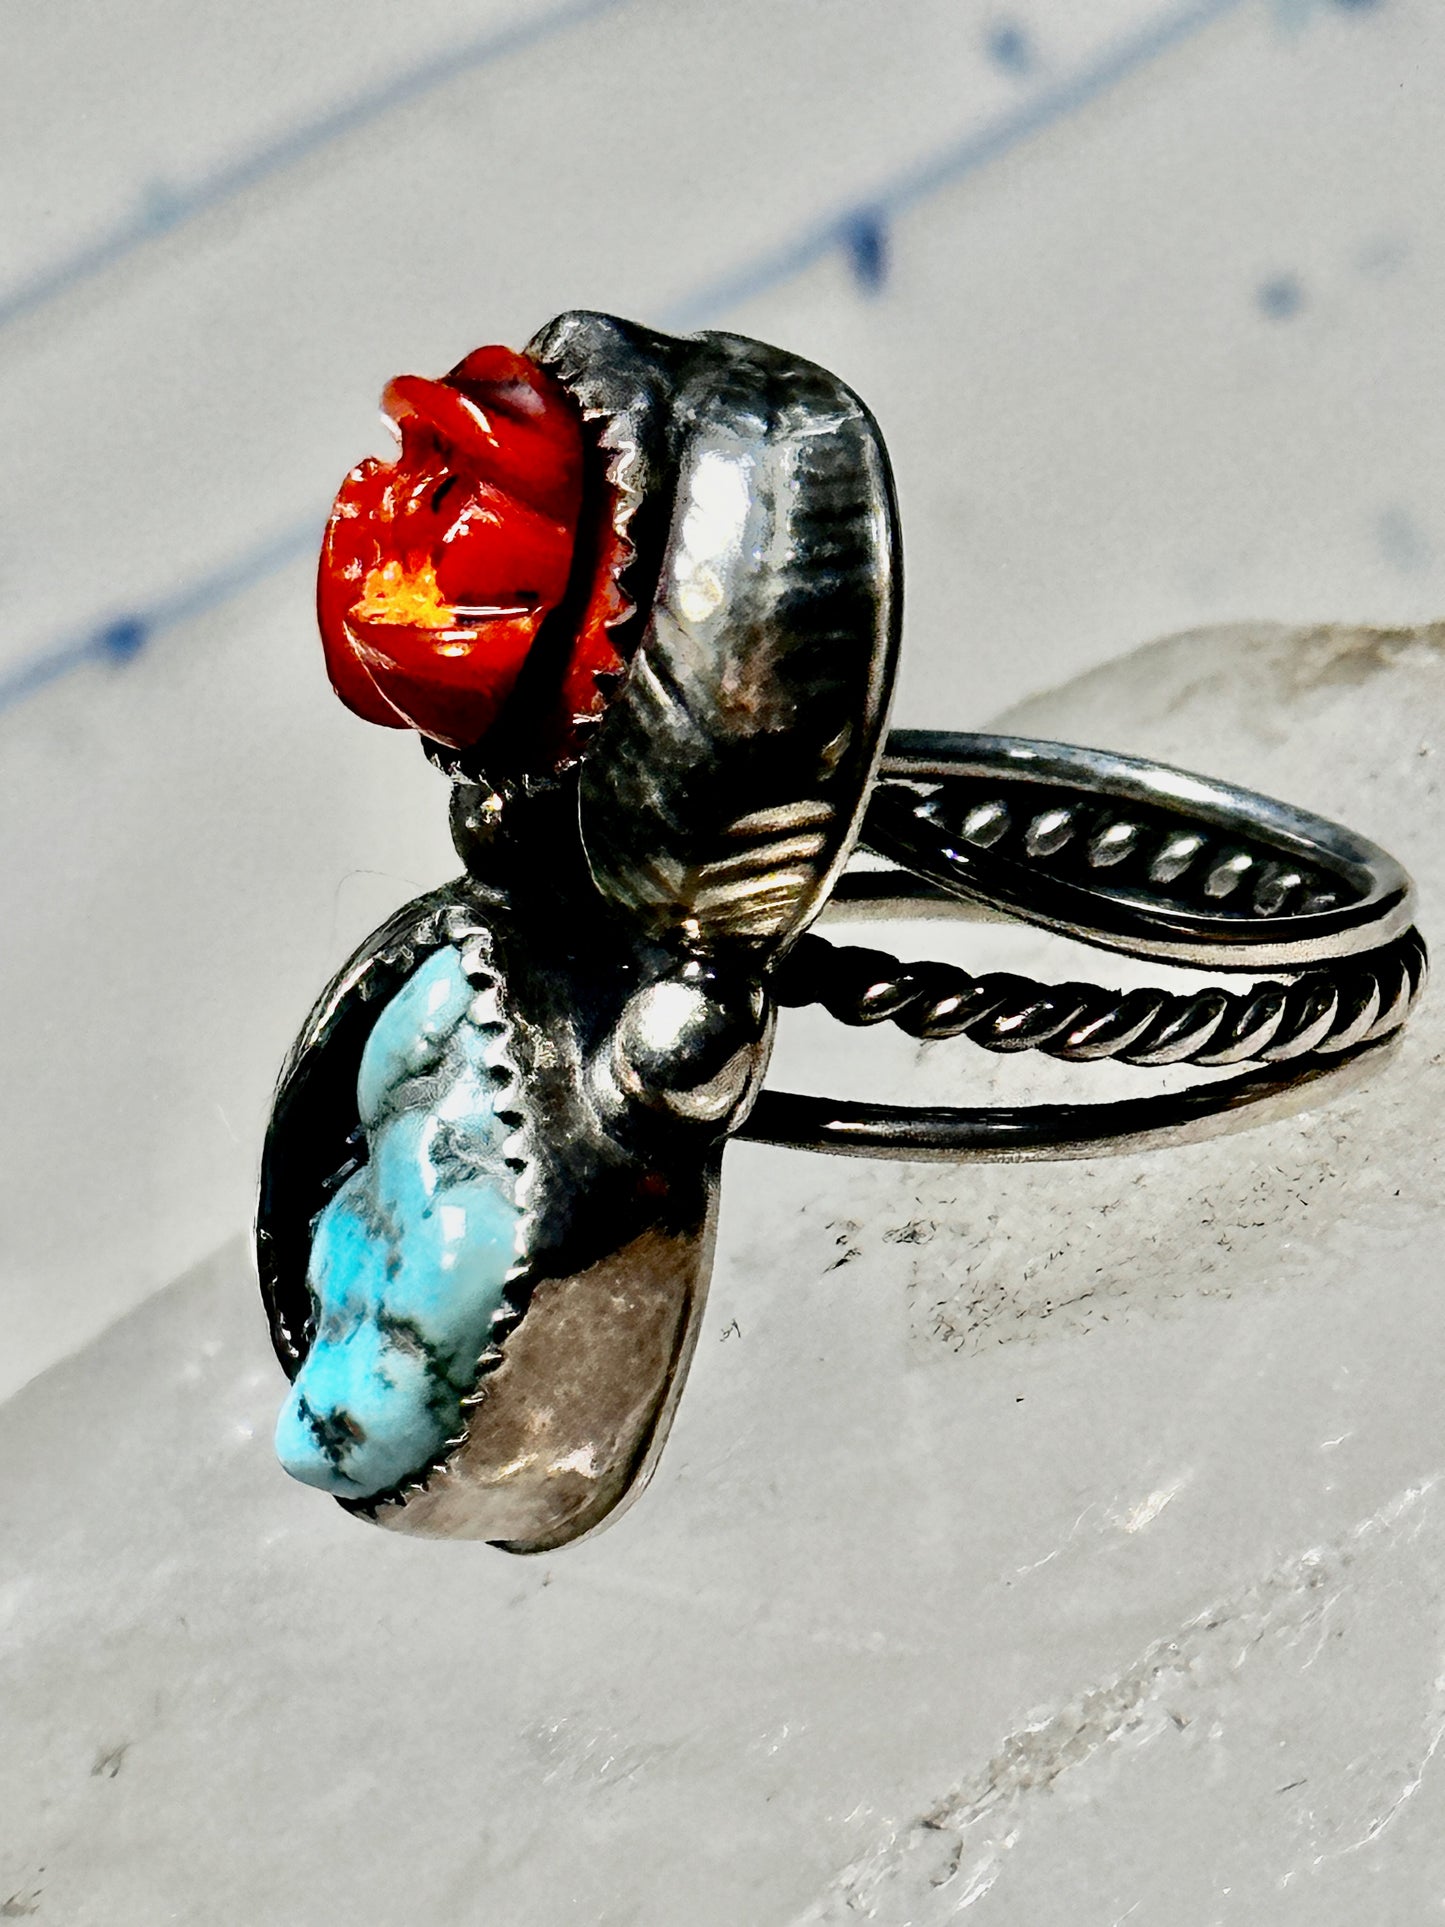 Turquoise ring coral rose Navajo leaves size 6.75 sterling silver women